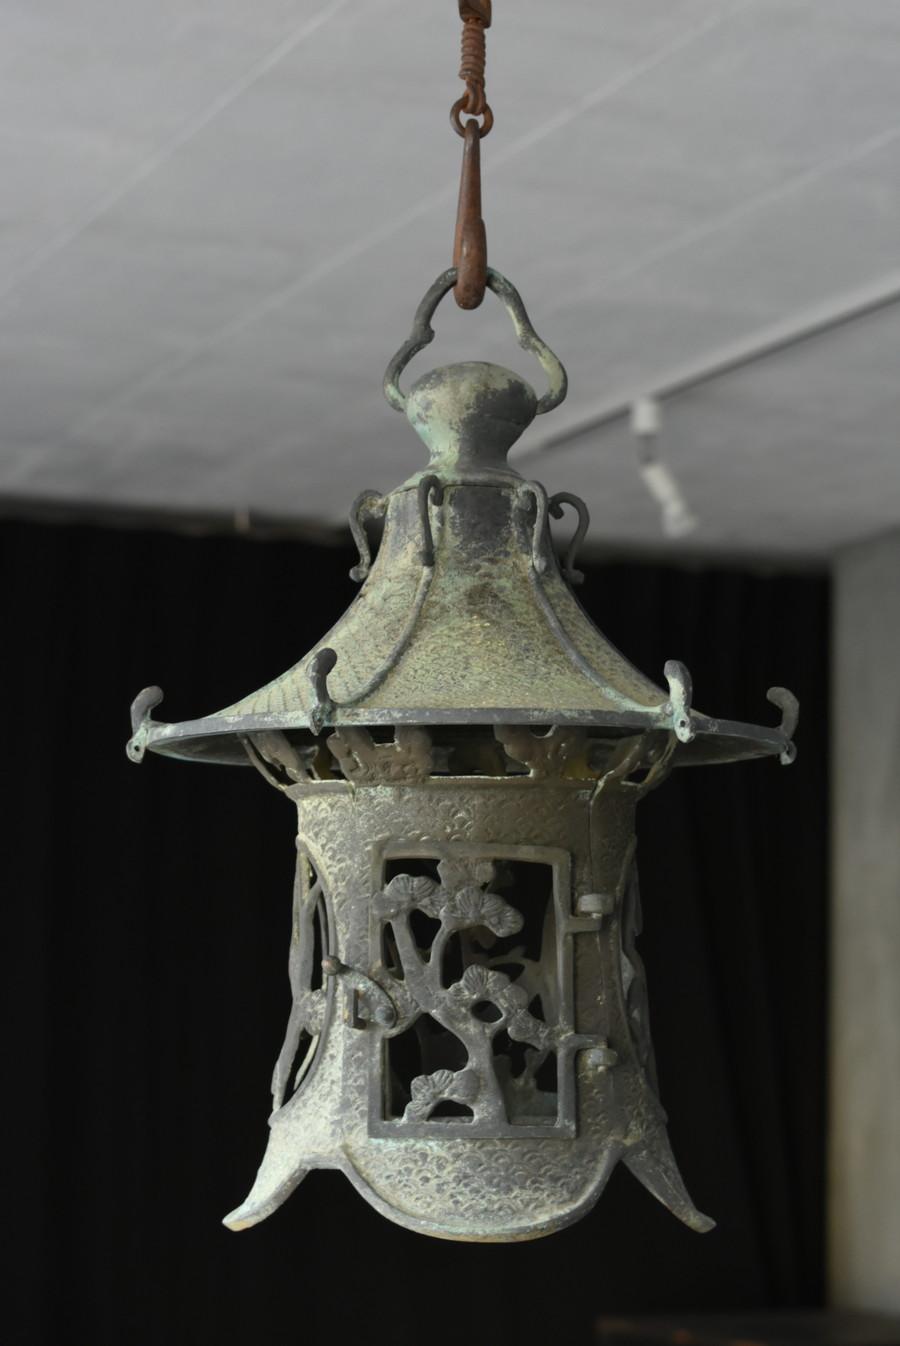 This is a bronze cast lantern made in the middle of the Showa period in Japan.
You can see that it is very finely decorated.
It has a semicircular geometric pattern, which is an auspicious pattern called “Seigaiha” which means prosperity. It is a